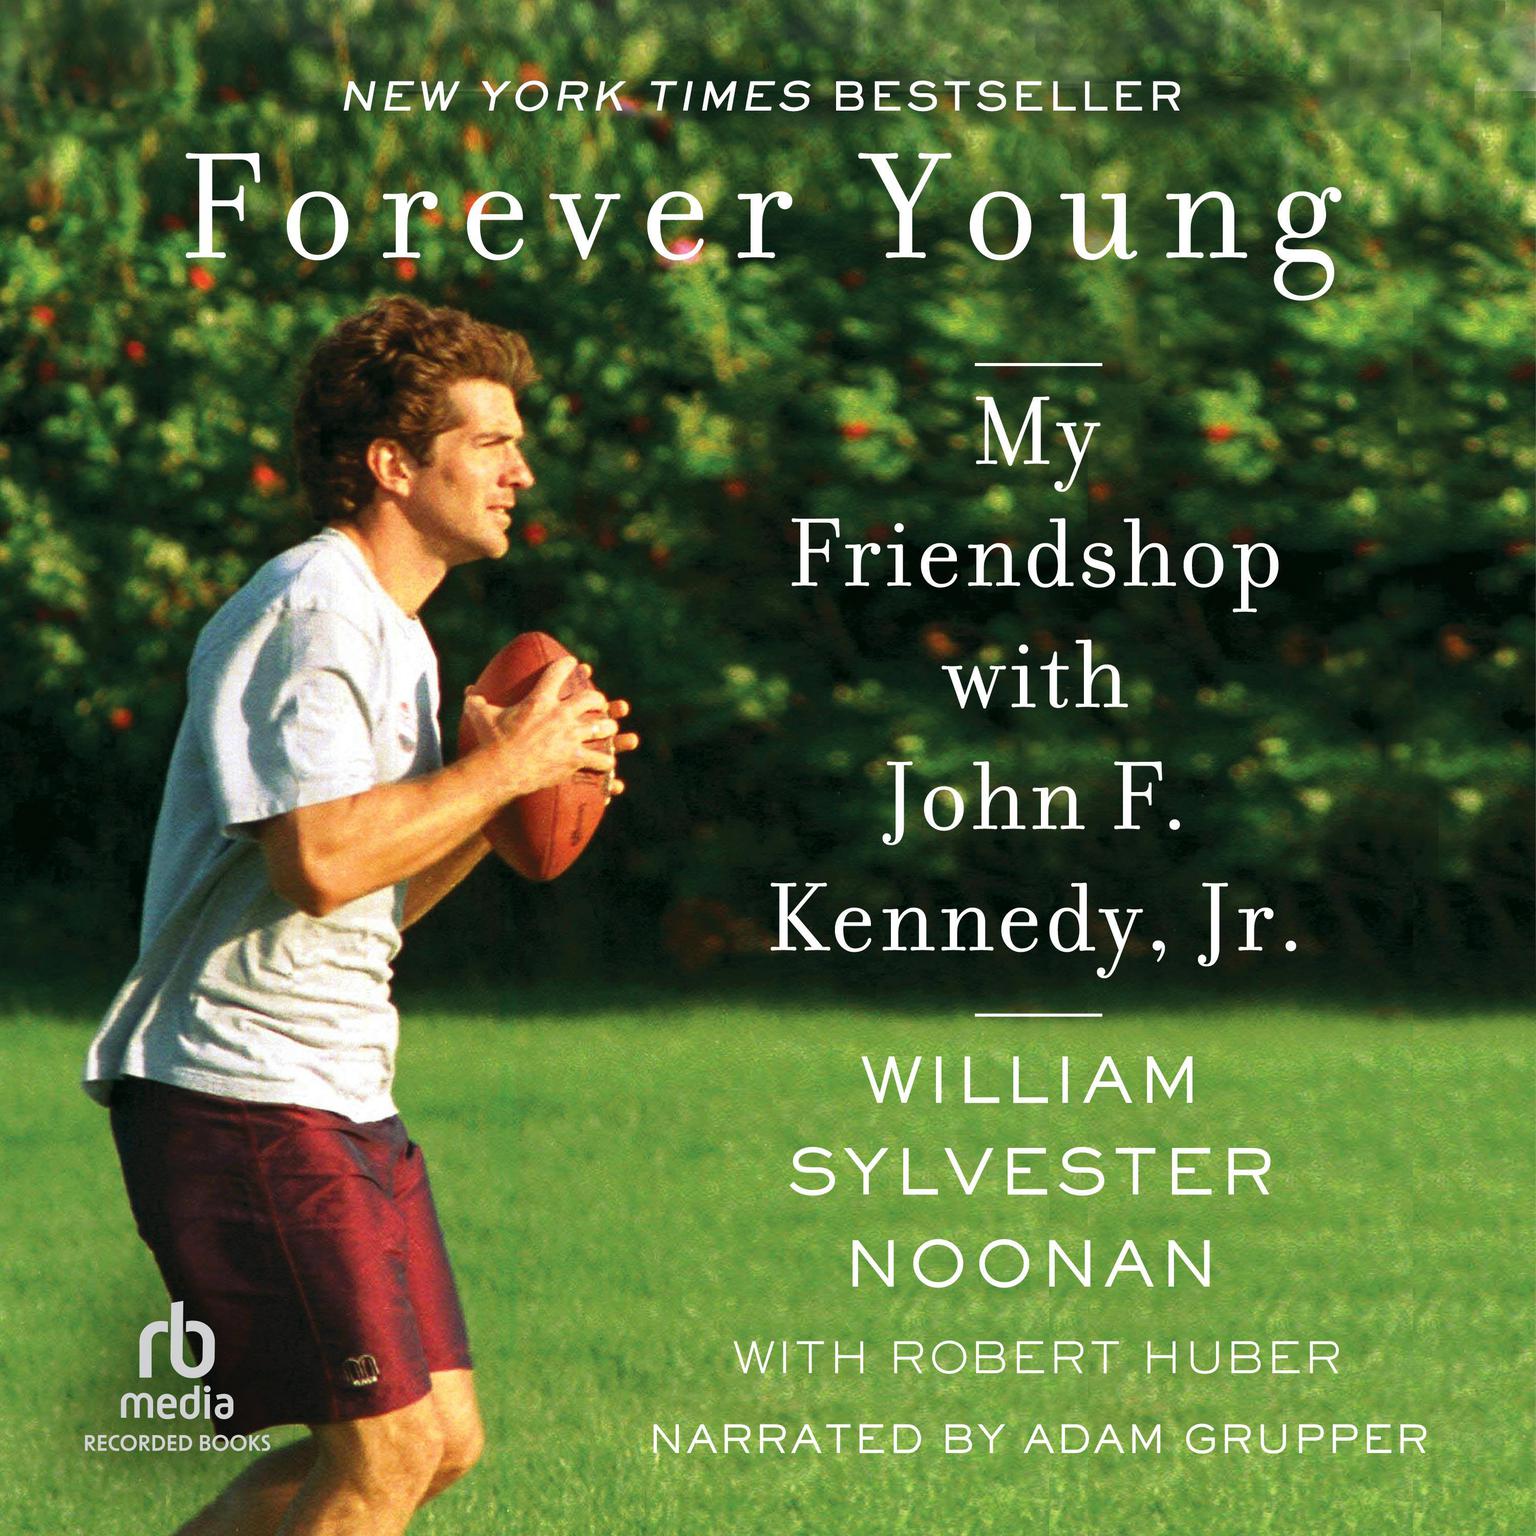 Forever Young: My Friendship with John F. Kennedy, Jr. Audiobook, by William Sylvester Noonan